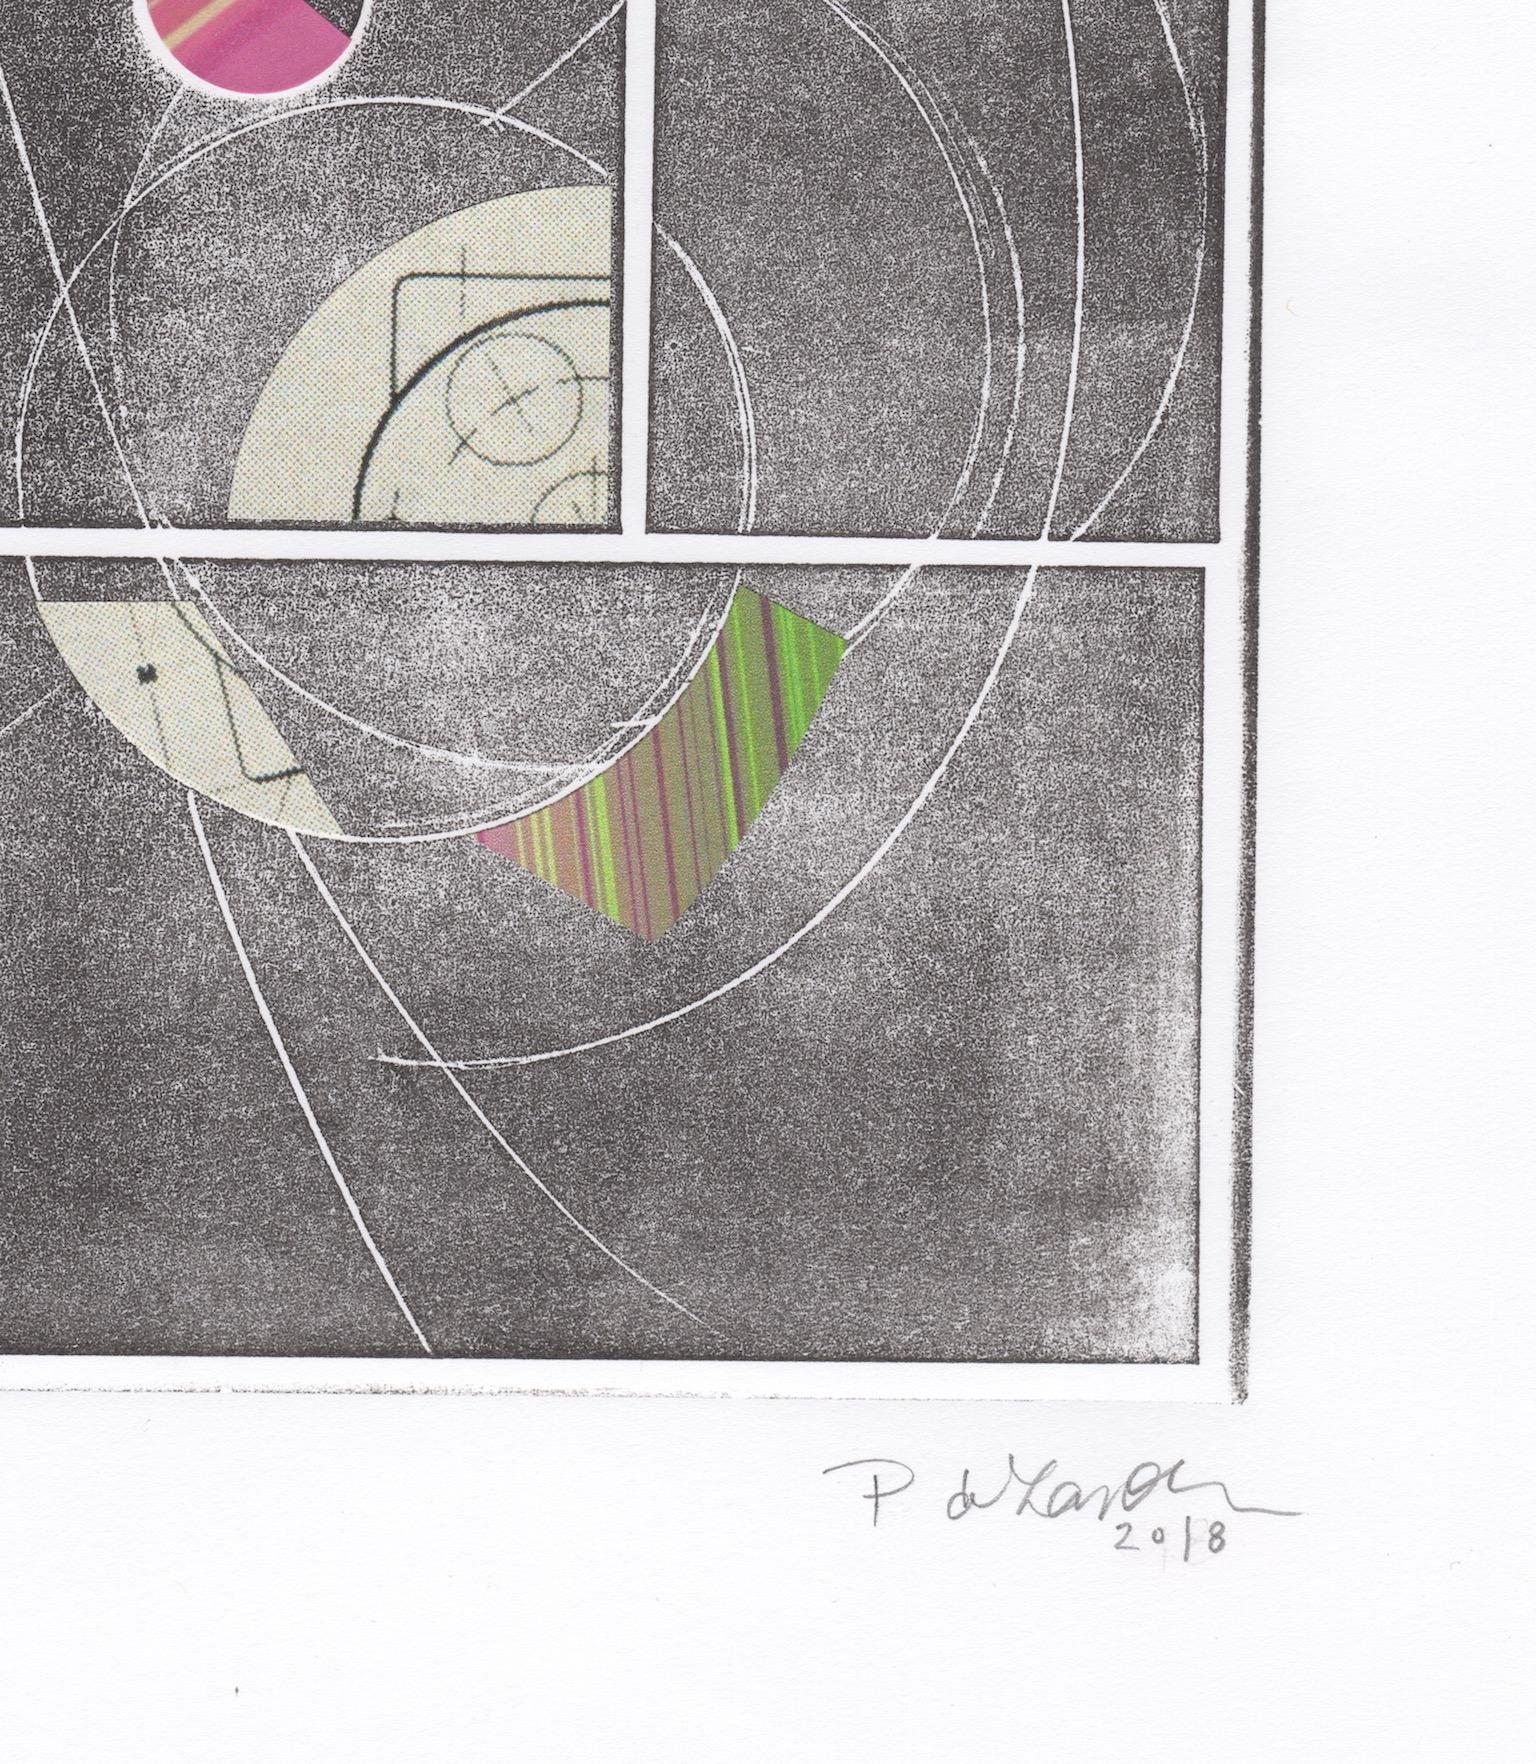 Patty deGrandpre’s “Satellite” is an abstract 8 x 8 inch monoprint on 12 x 12 inch paper incorporating layers of white delicate circles and sinuous lines on a black hued background with contrasting collage of small striated colorful shapes and